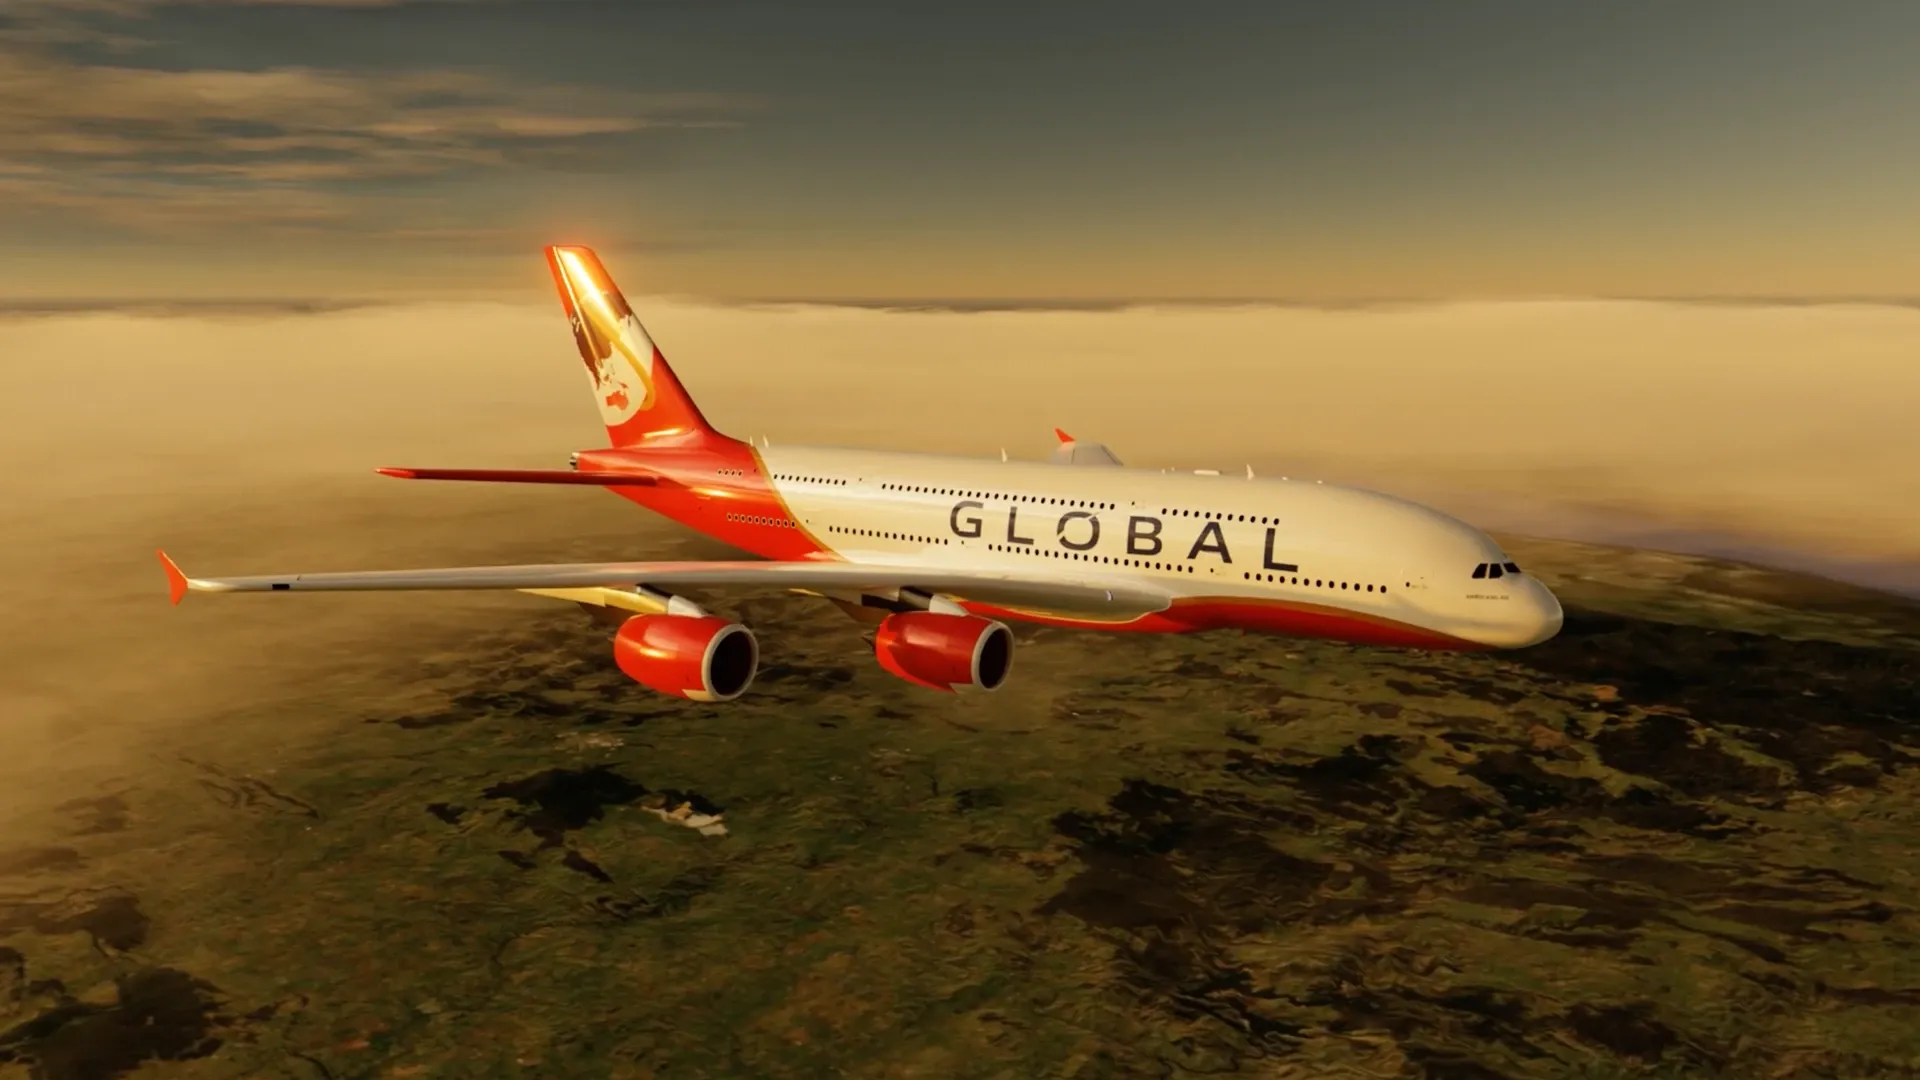 Global Airlines - The best way to fly